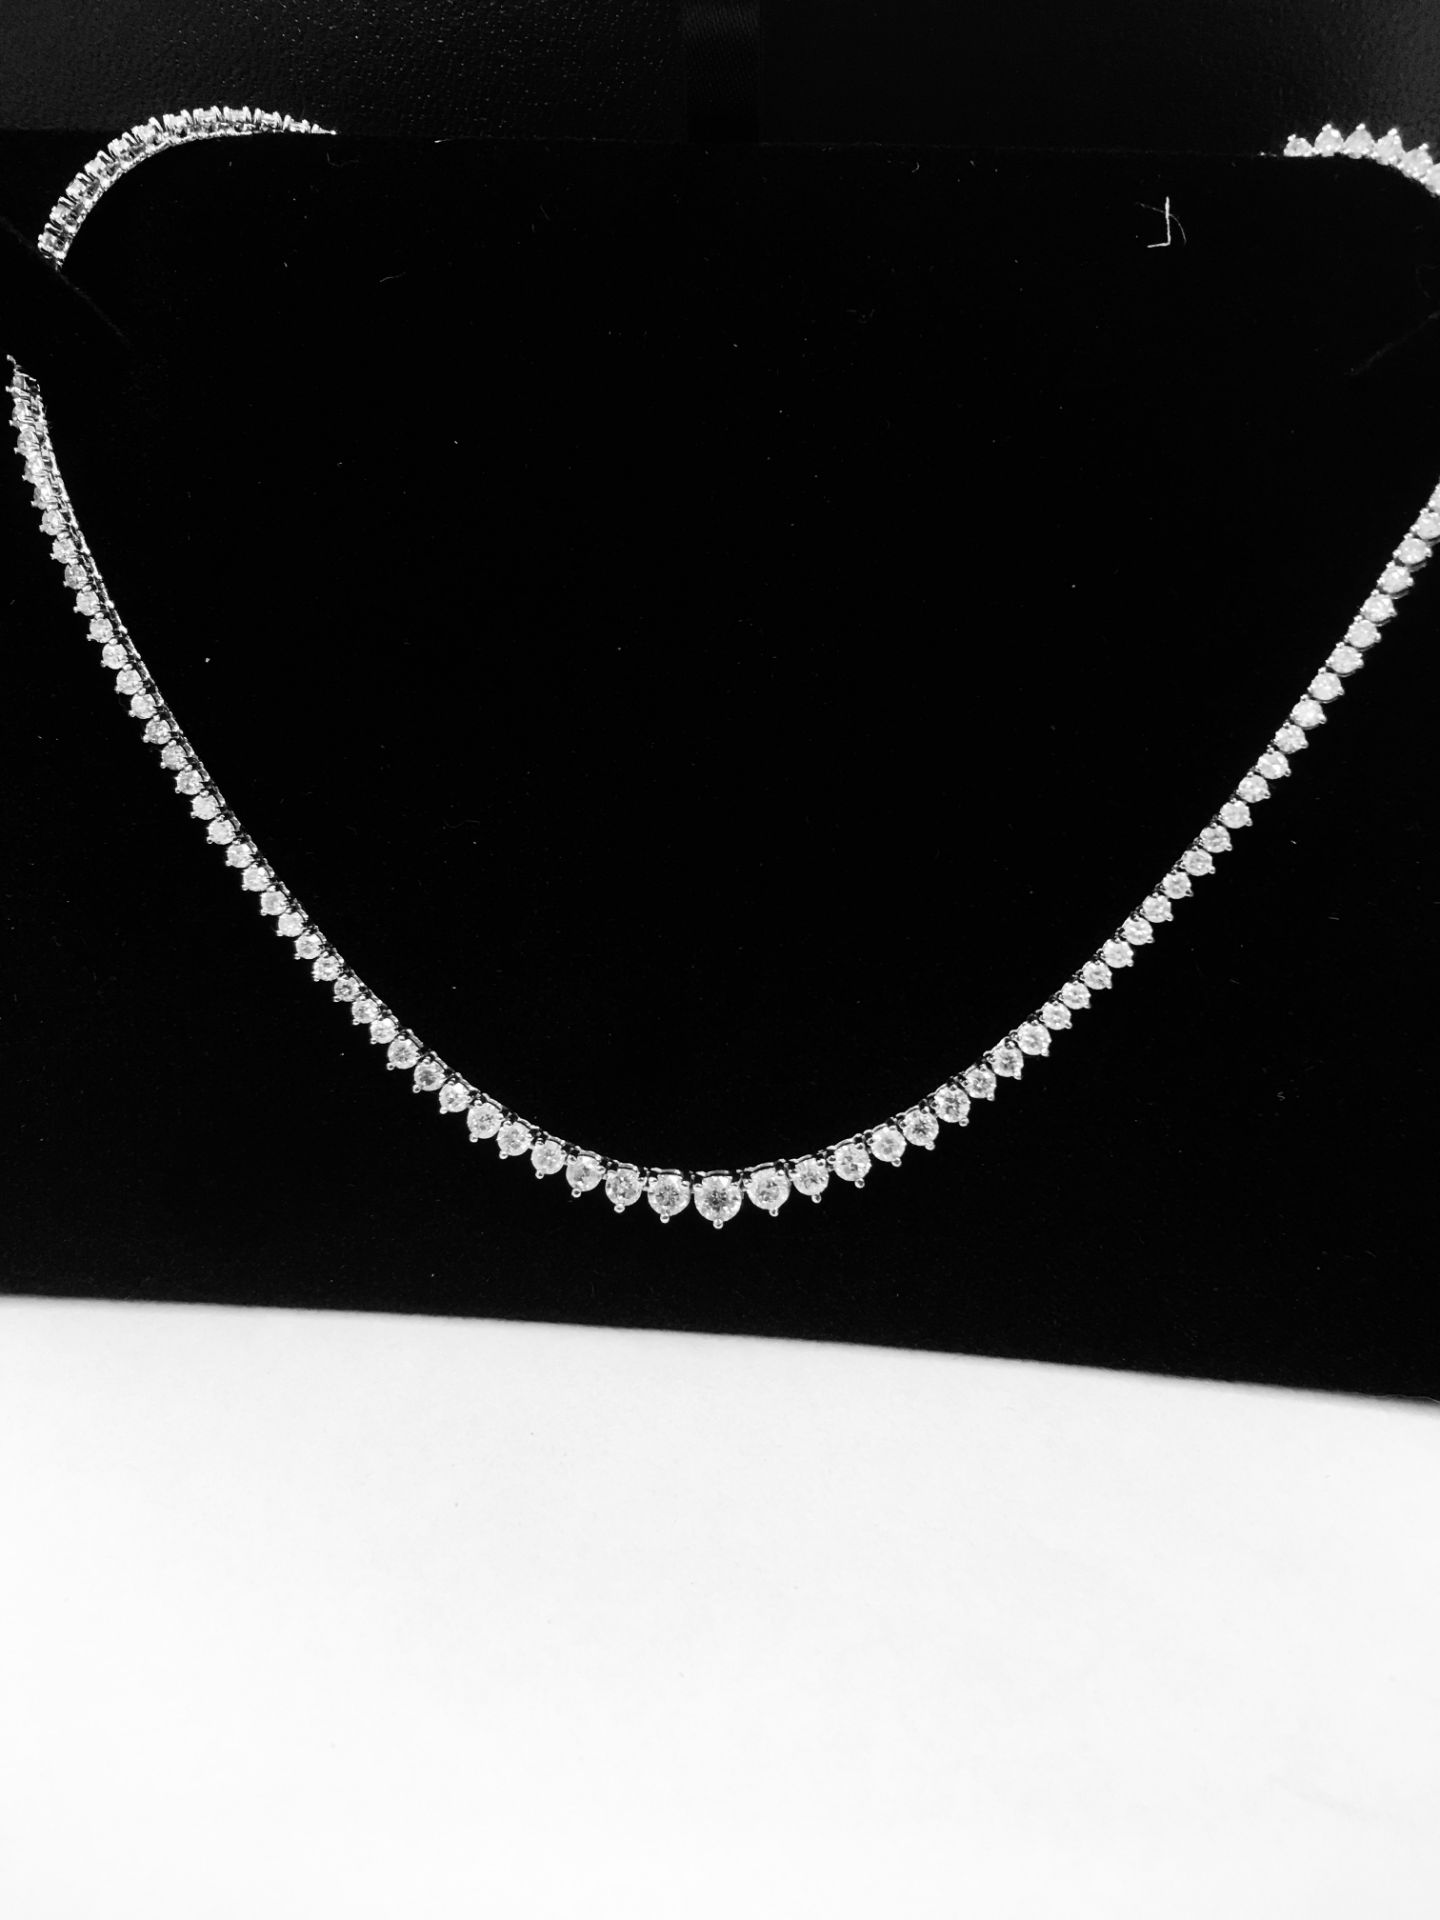 6.50ct Diamond tennis style necklace. 3 claw setting. Graduated diamonds, G colour, Si1 clarity - Image 3 of 6